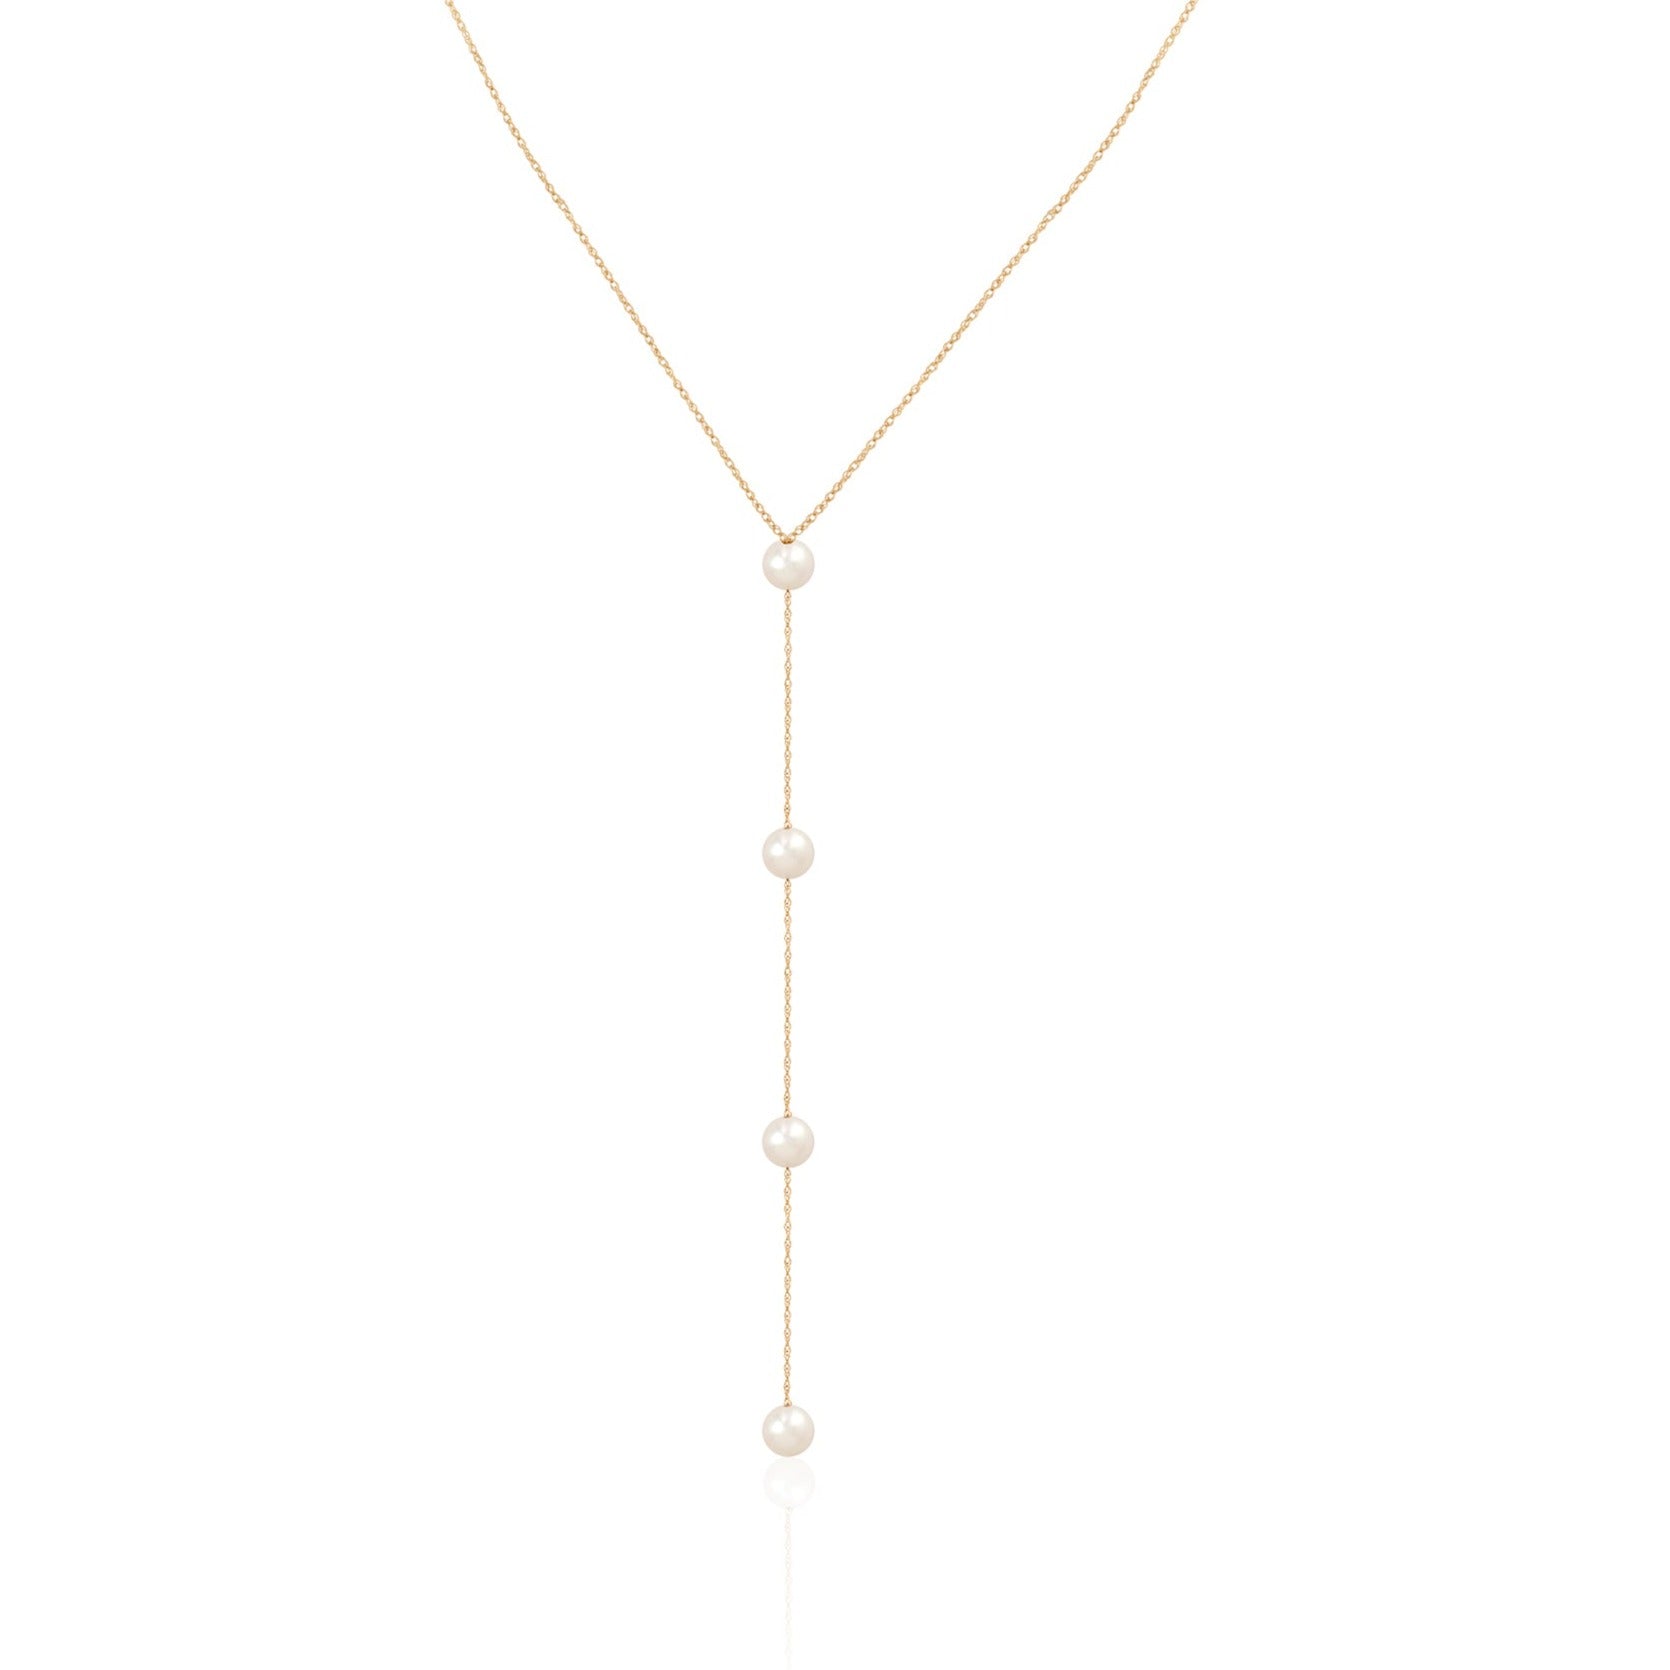 Freshwater pearl and solid gold lariat necklace